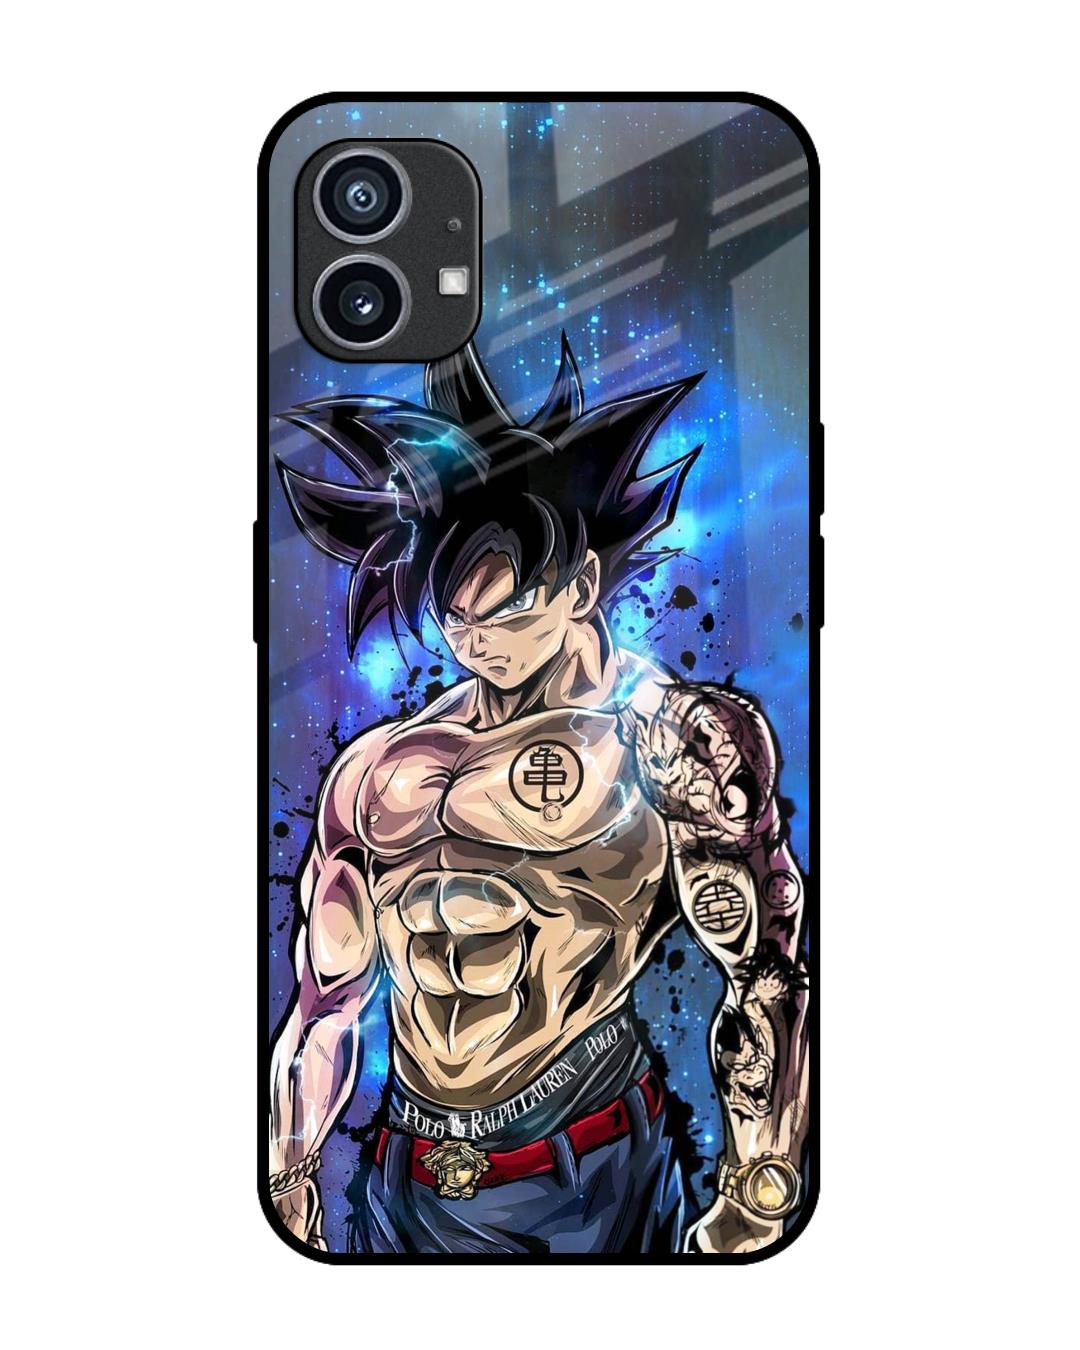 Naruto Phone Case - Protect Your Phone In Anime Style For I Phone 6 Back  Cover & Case At 99 Only - Spkases